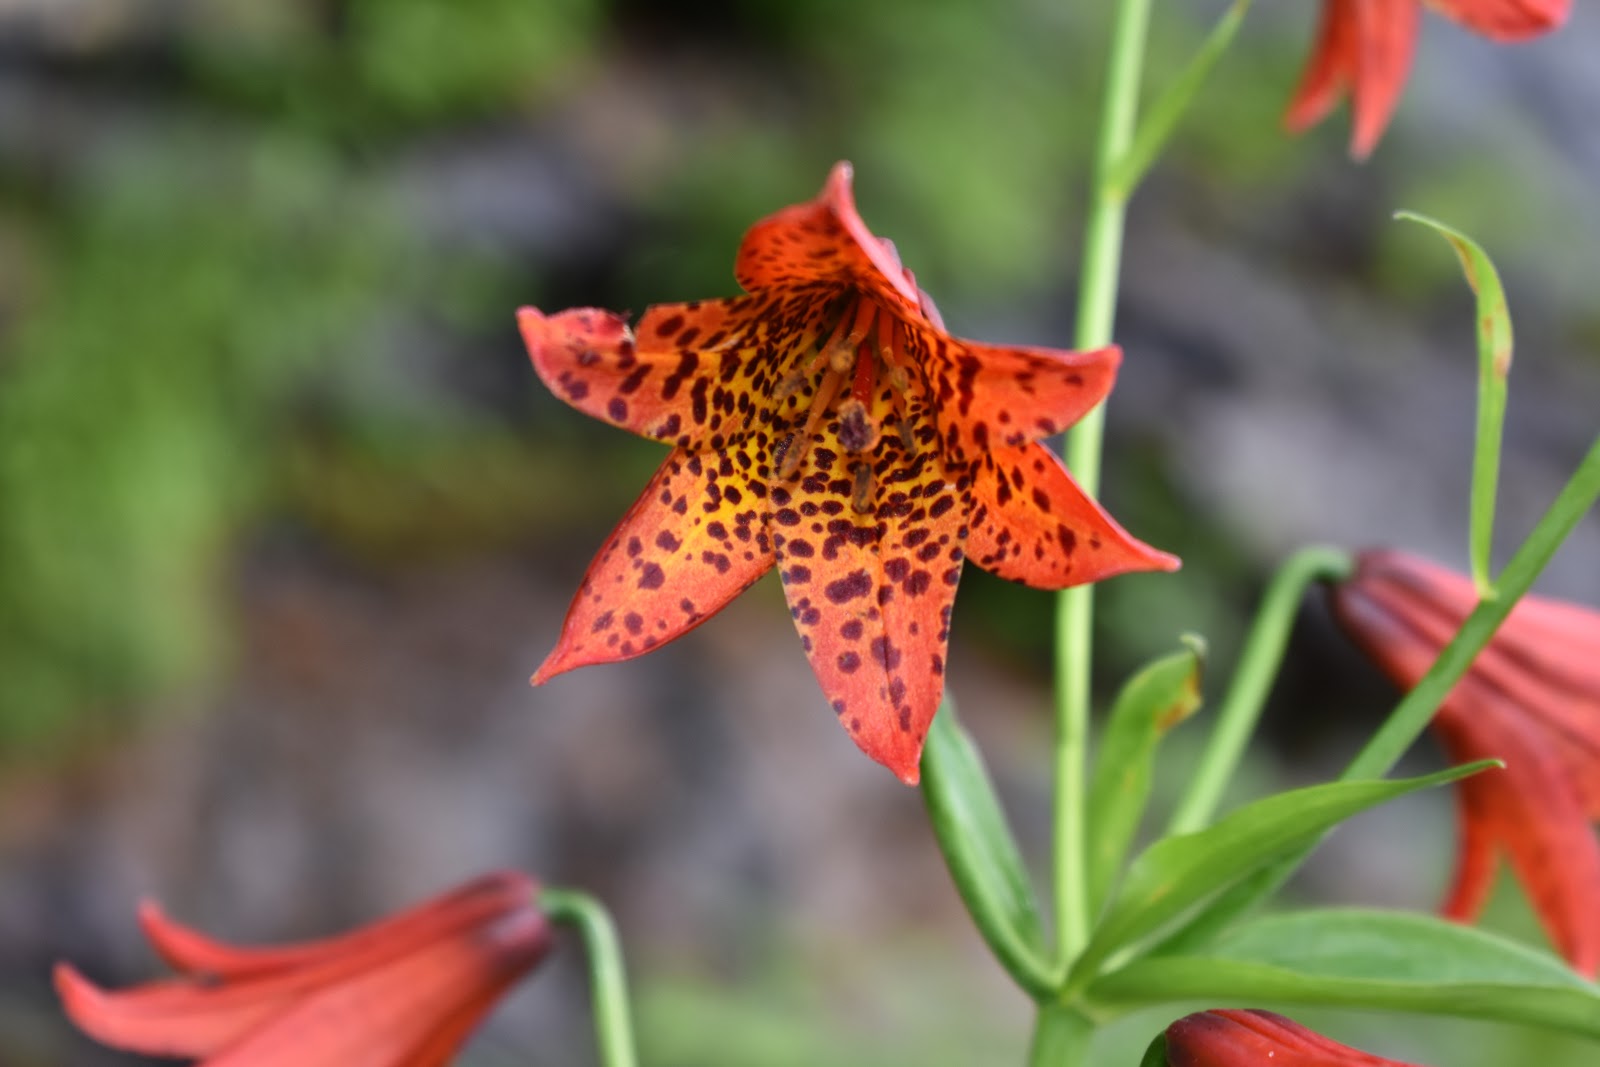 close-up photo of a single Gray's lily flower, with red petals speckled inside